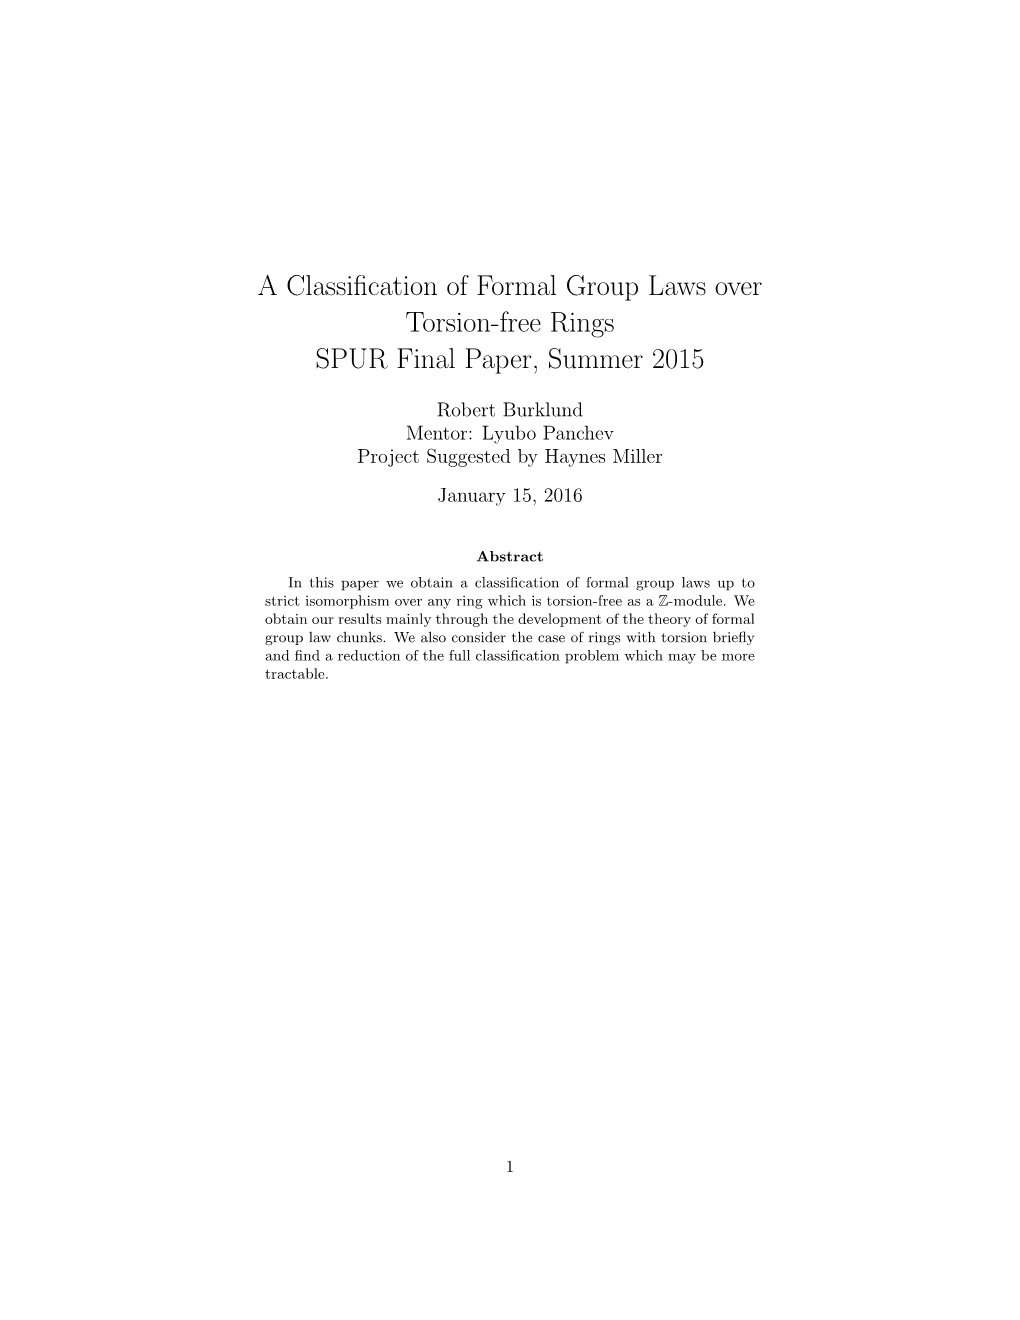 A Classification of Formal Group Laws Over Torsion-Free Rings